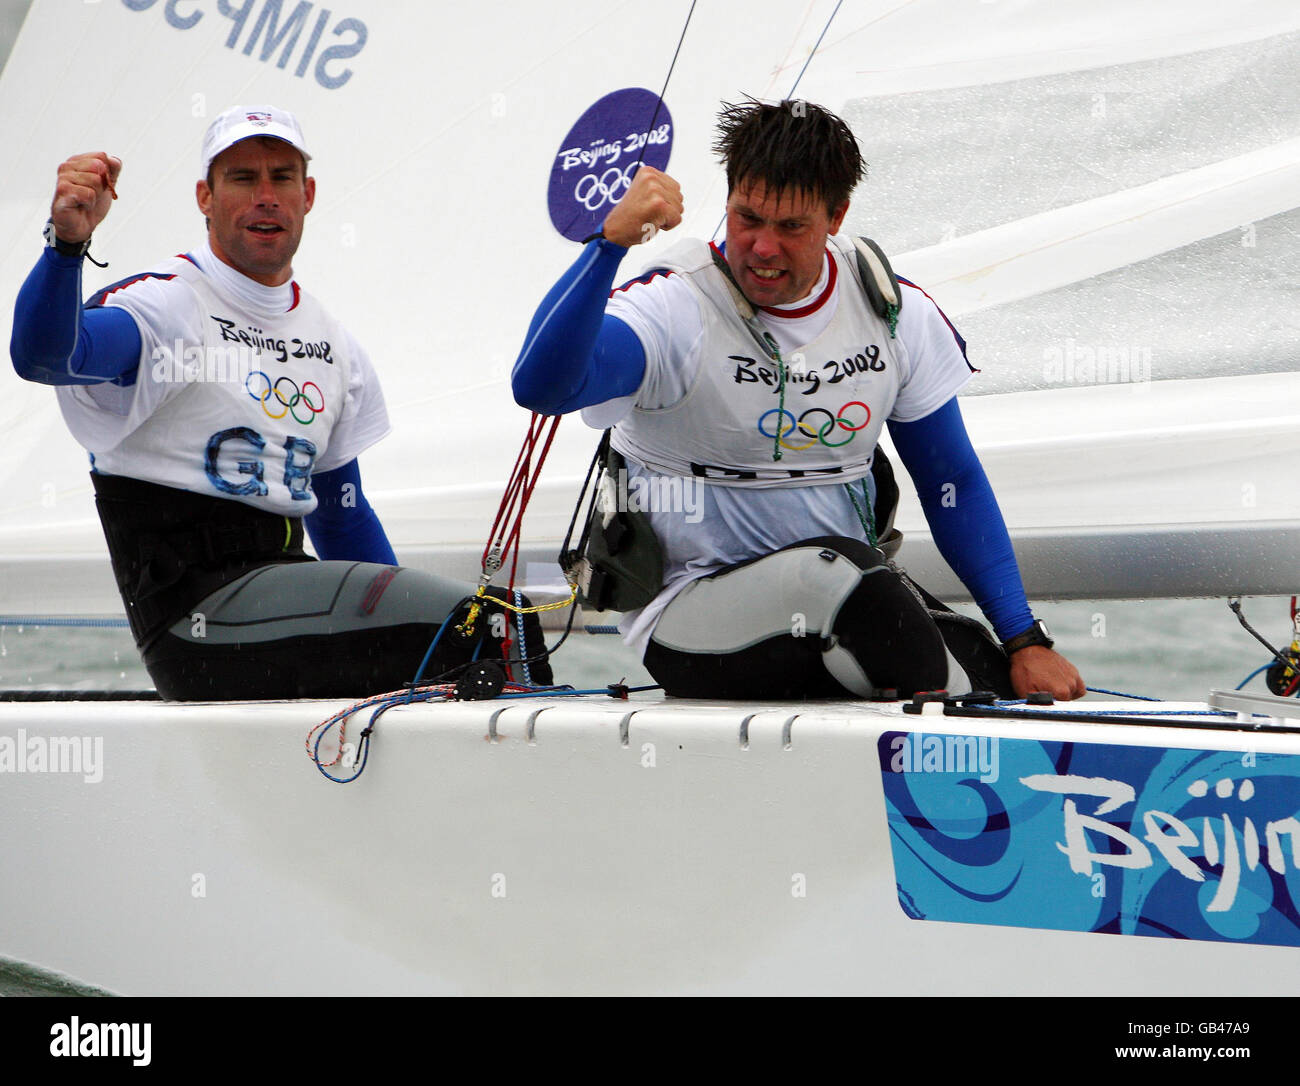 Great Britain's duo of Iain Percy (left) and Andrew Simpson celebrate after winning a Gold Medal in the Star class at the 2008 Beijing Olympic Games' Sailing Centre in Qingdao, China. Stock Photo